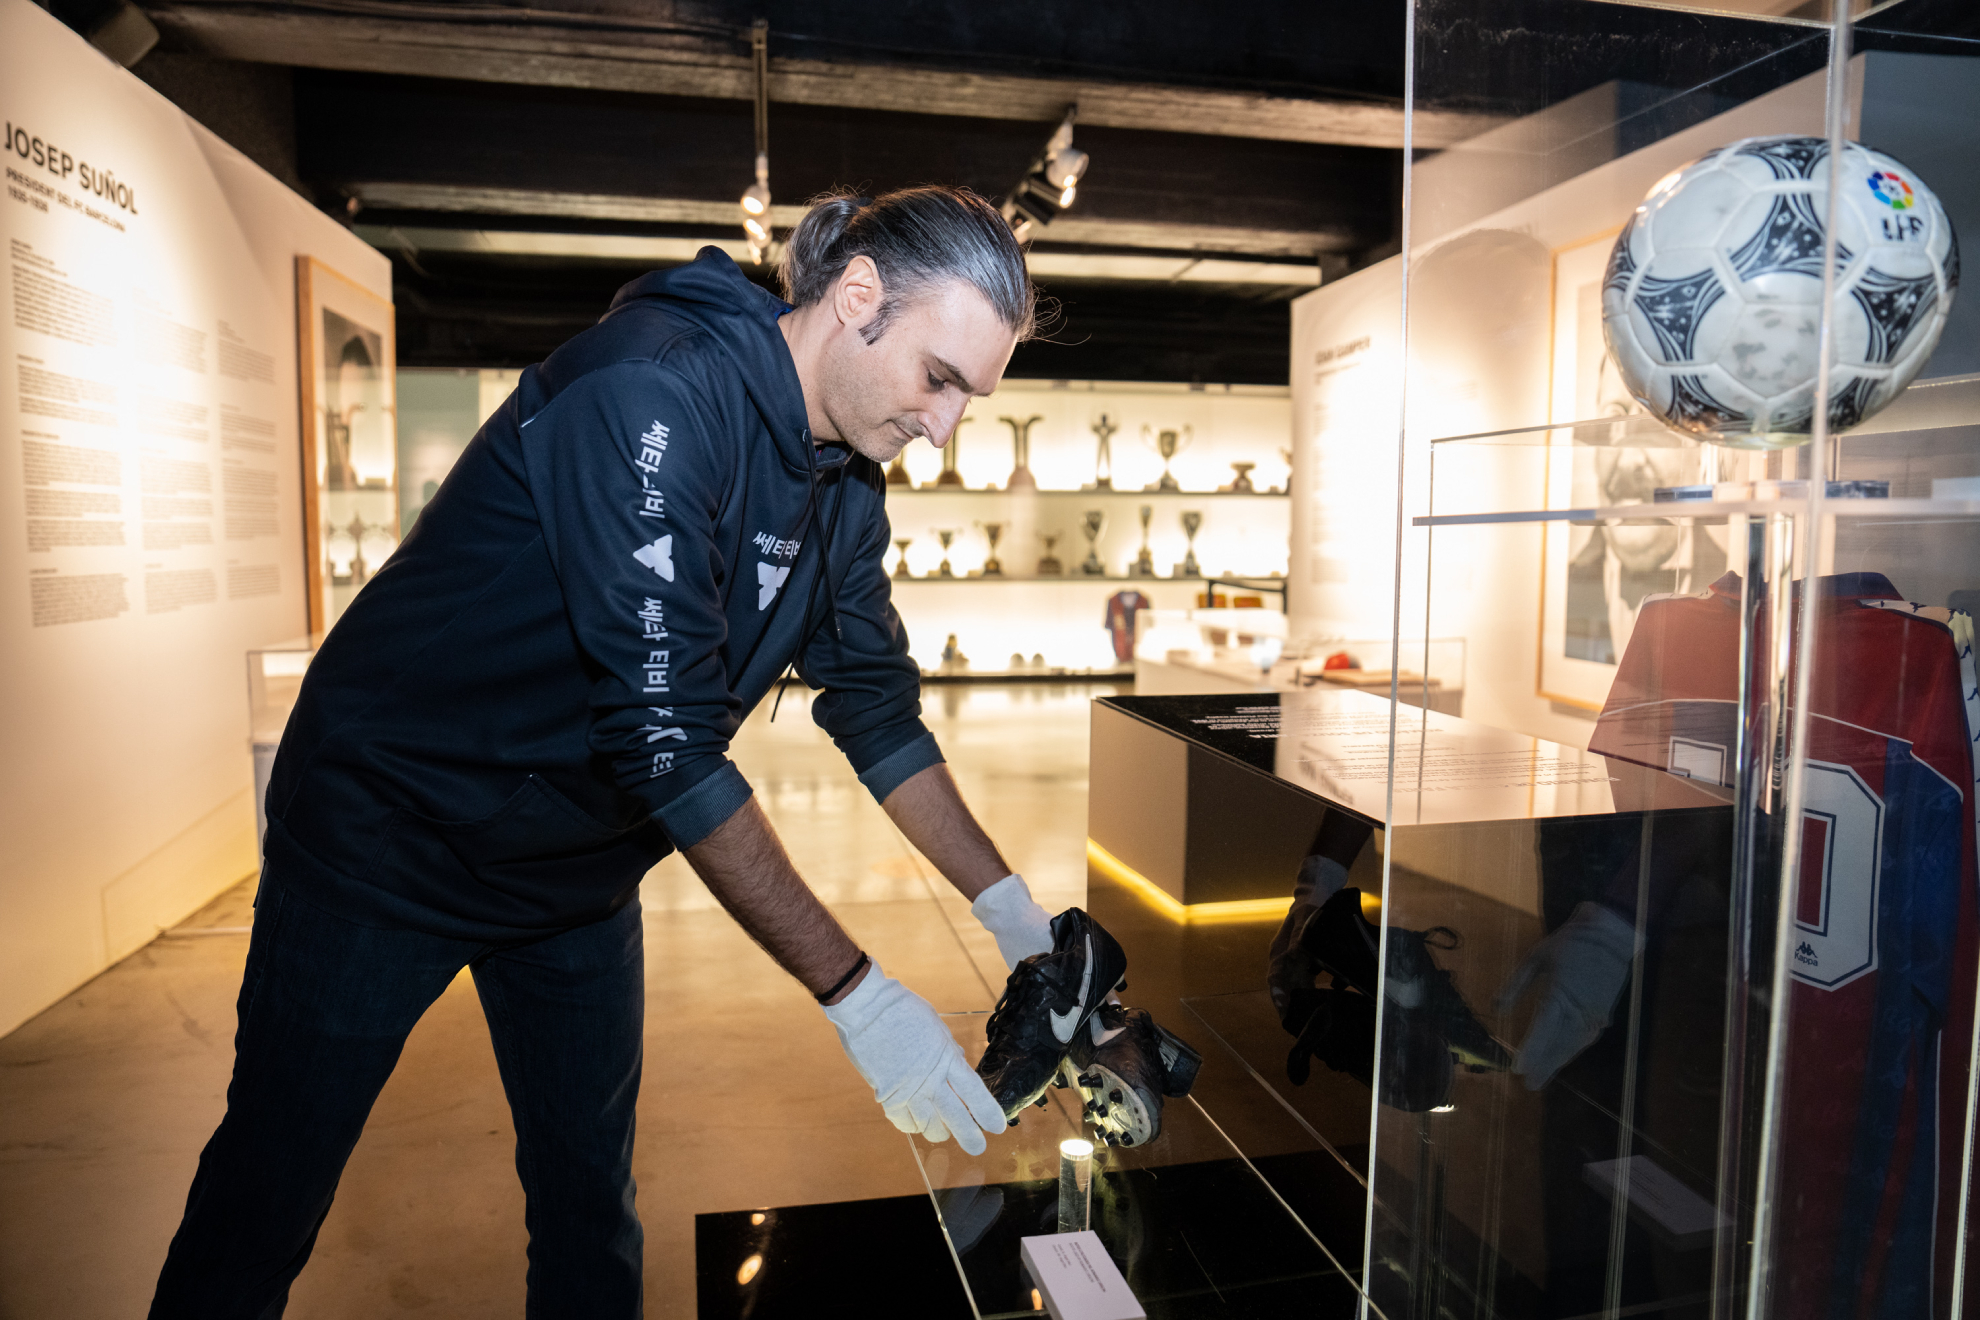 Romario's boots are now in Barcelona's museum